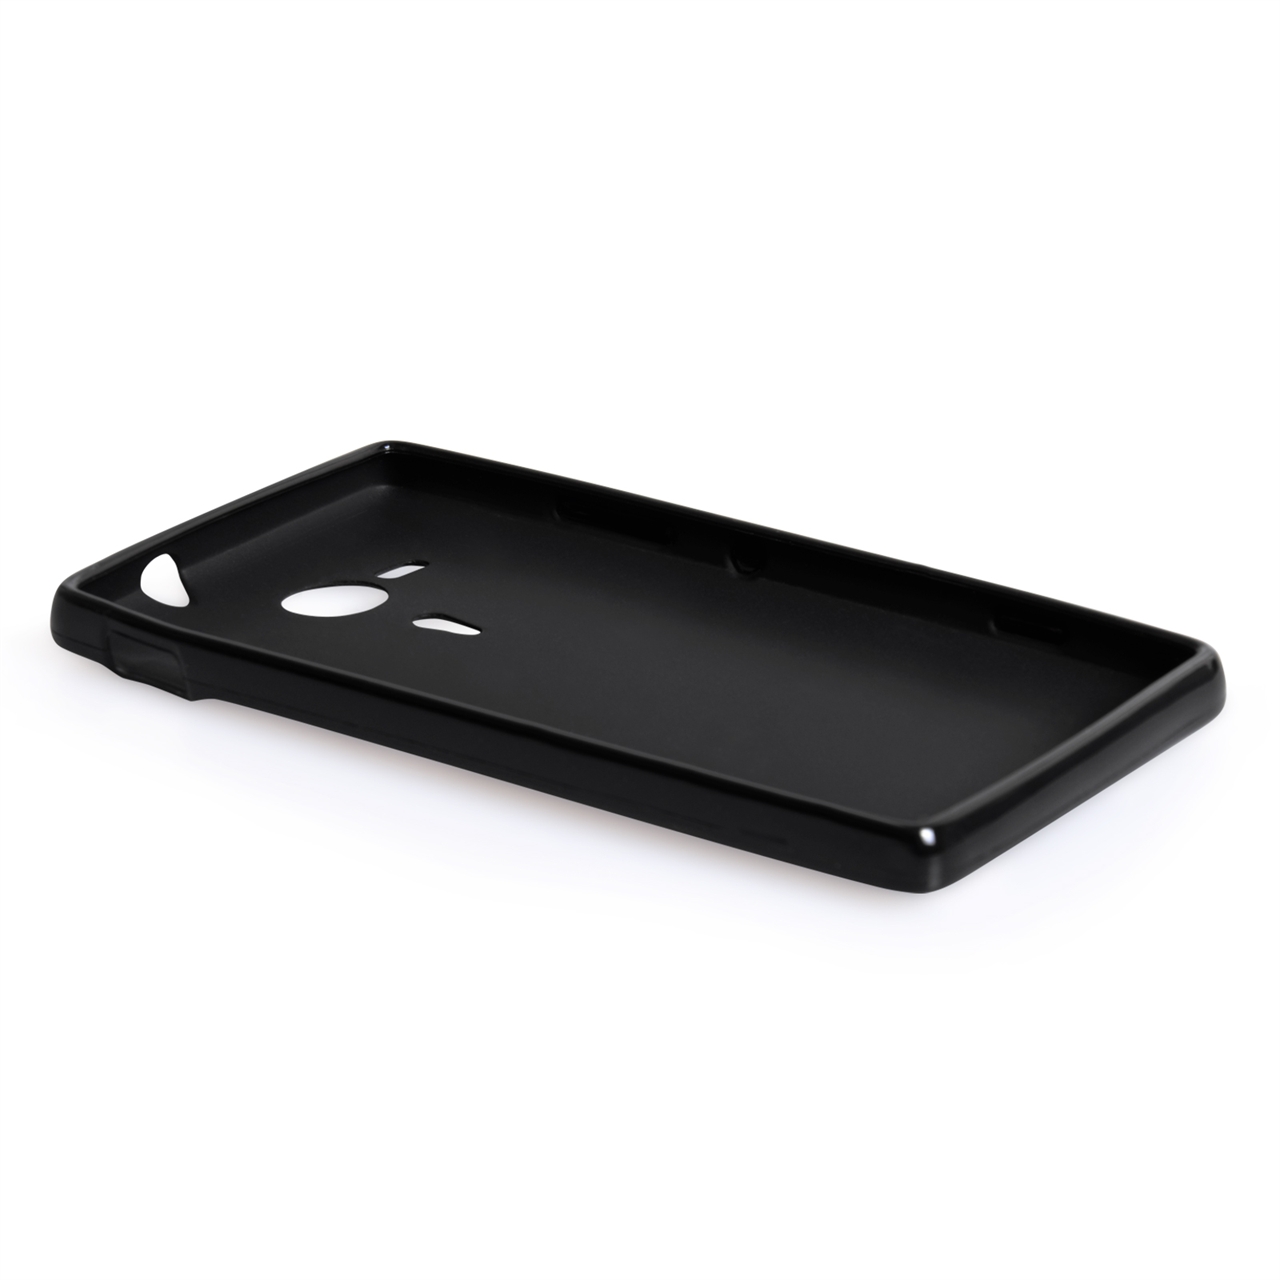 YouSave Accessories Sony Xperia SP Silicone Gel Case - Black